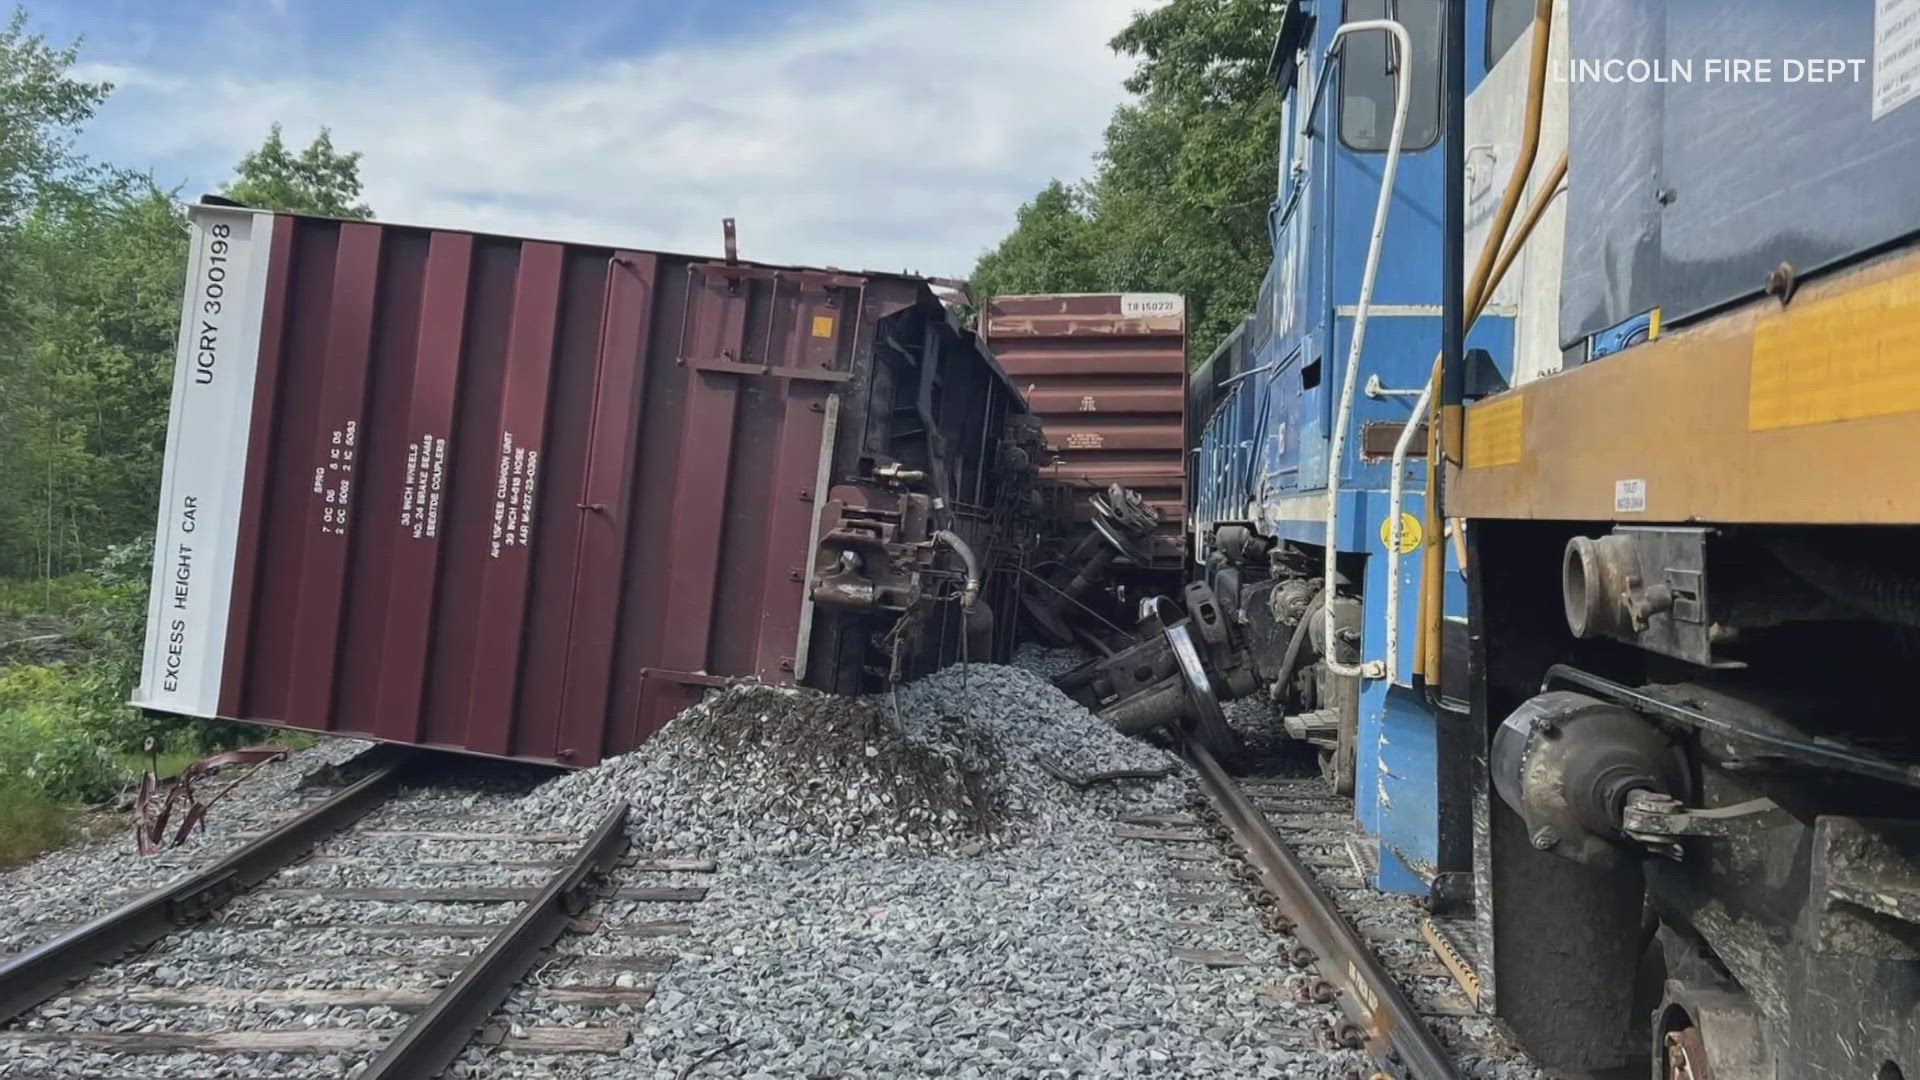 Officials said the axle of a box car punctured the diesel tank of the train engine. The tank had an estimated 2,500 gallons of fuel inside.